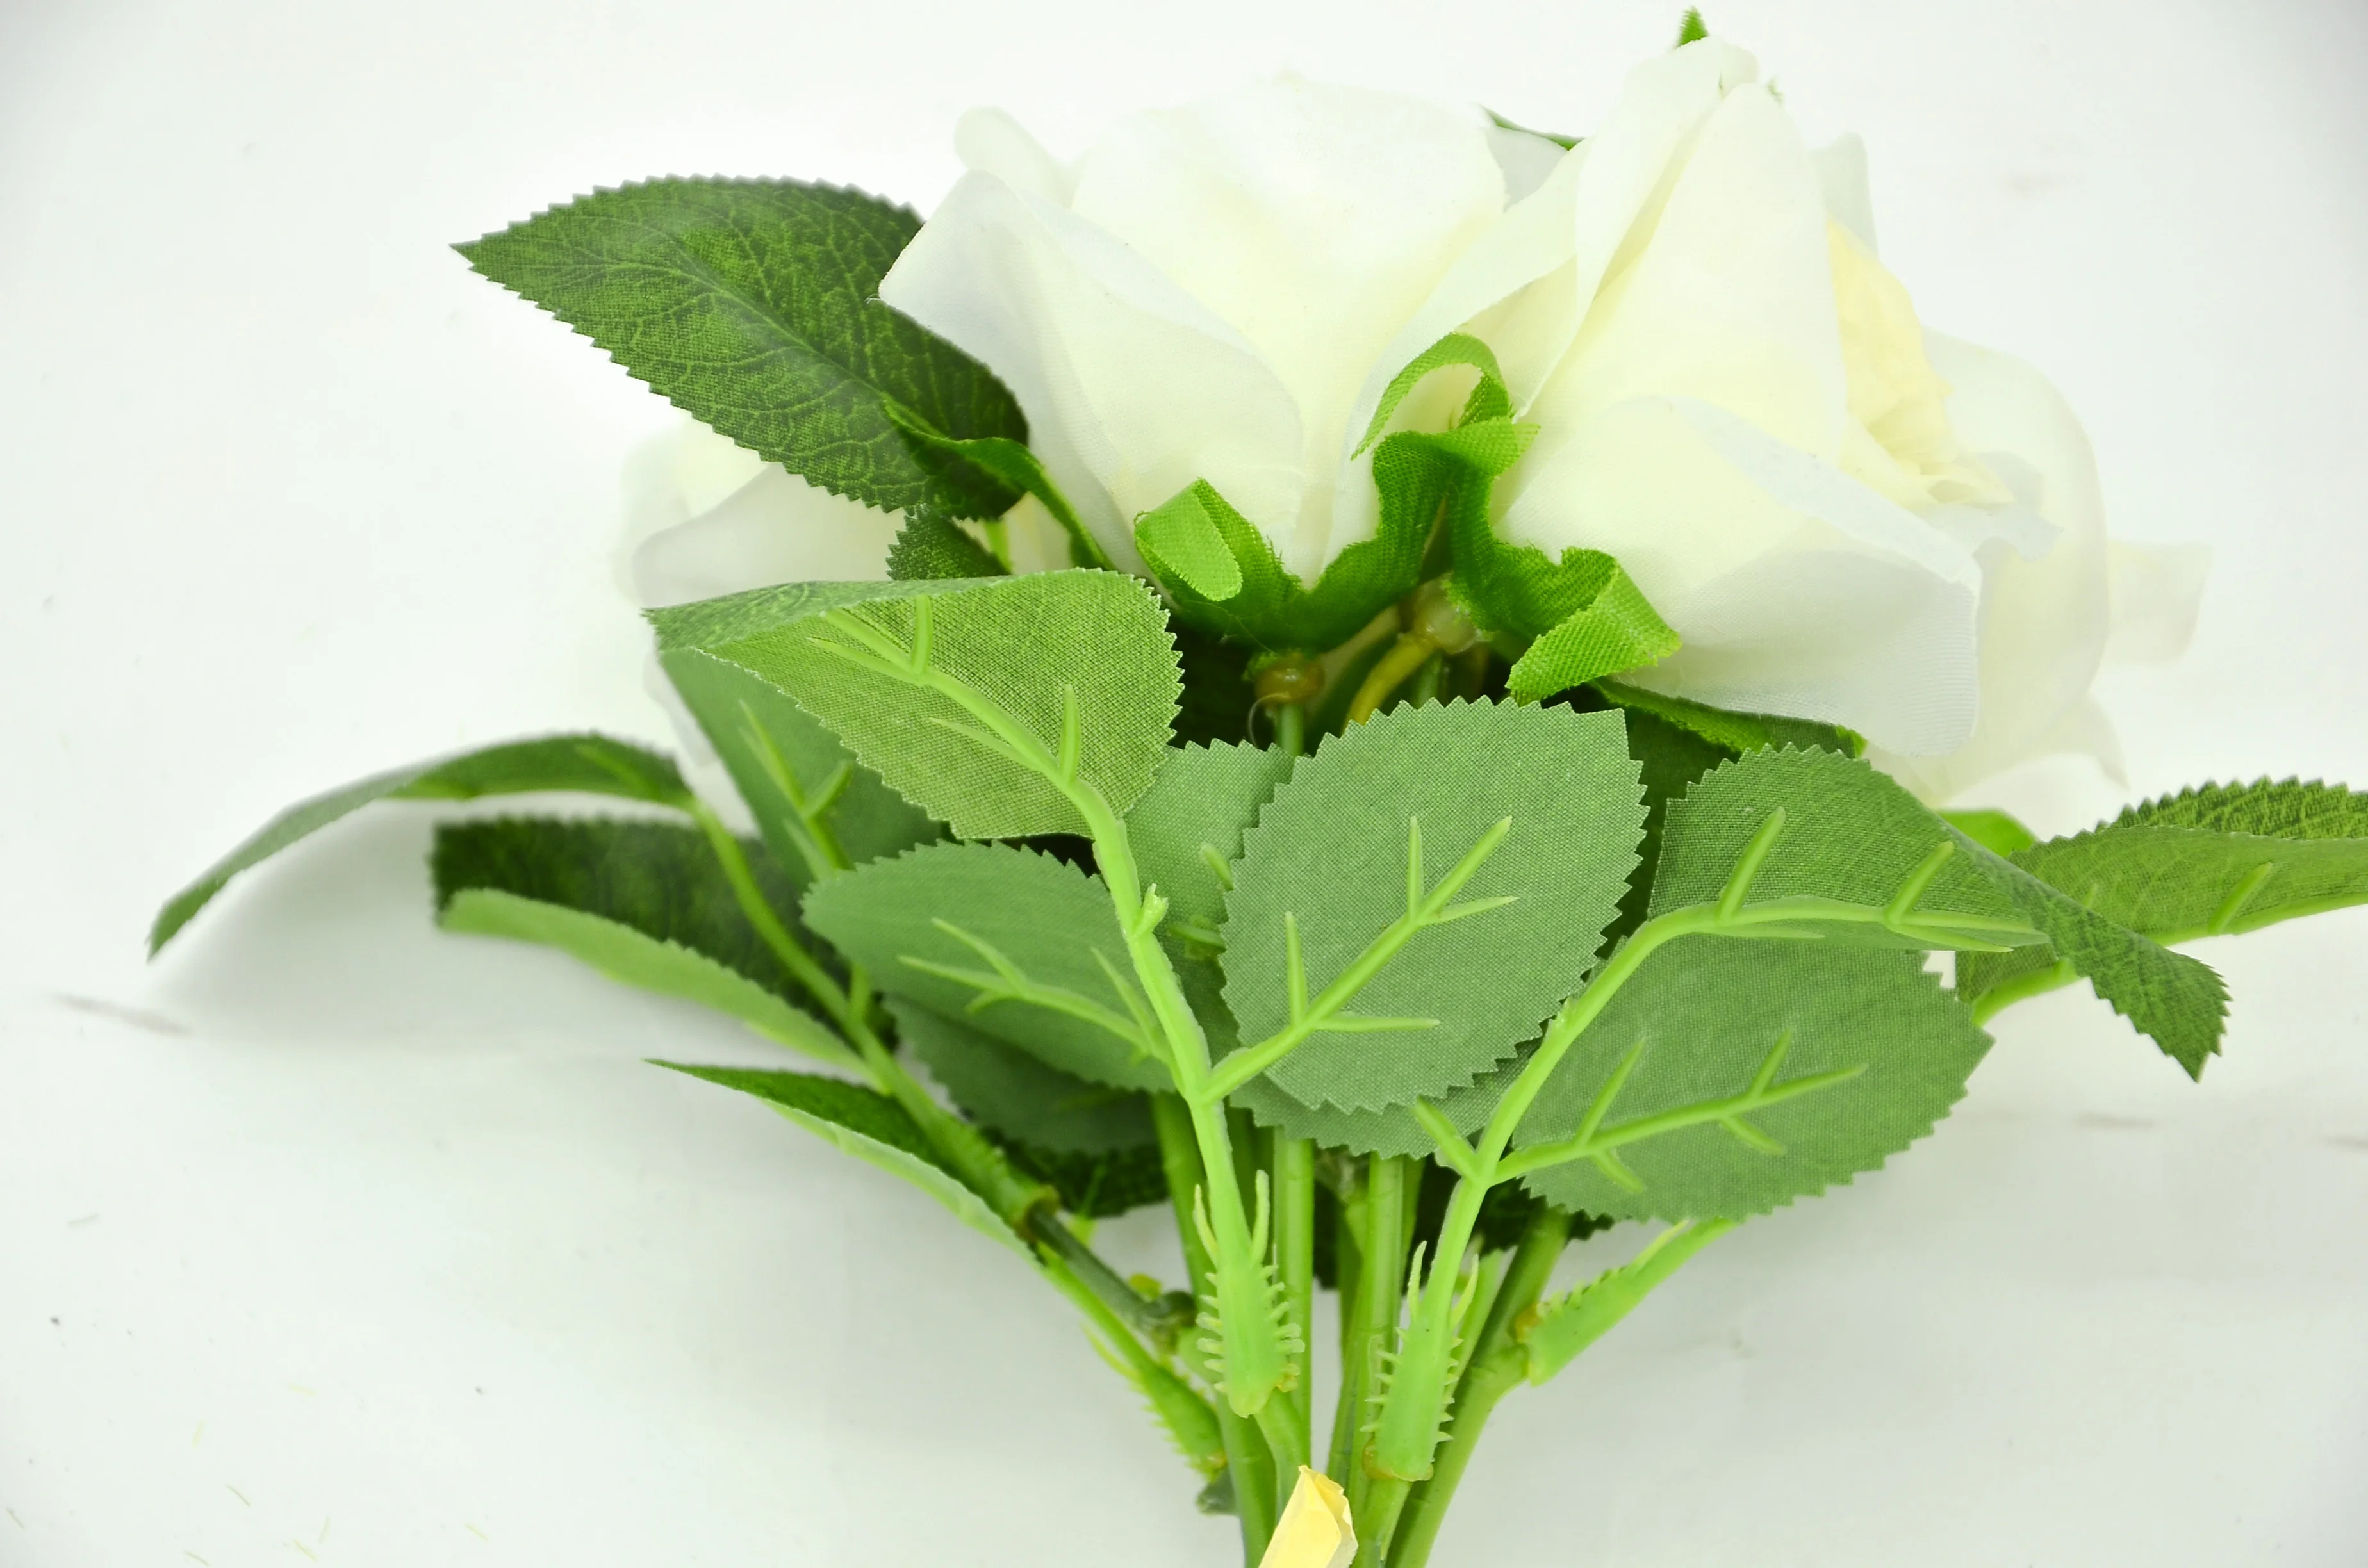 
2021 Hot selling Mini White Bouquet Artificial Flower Rose. 